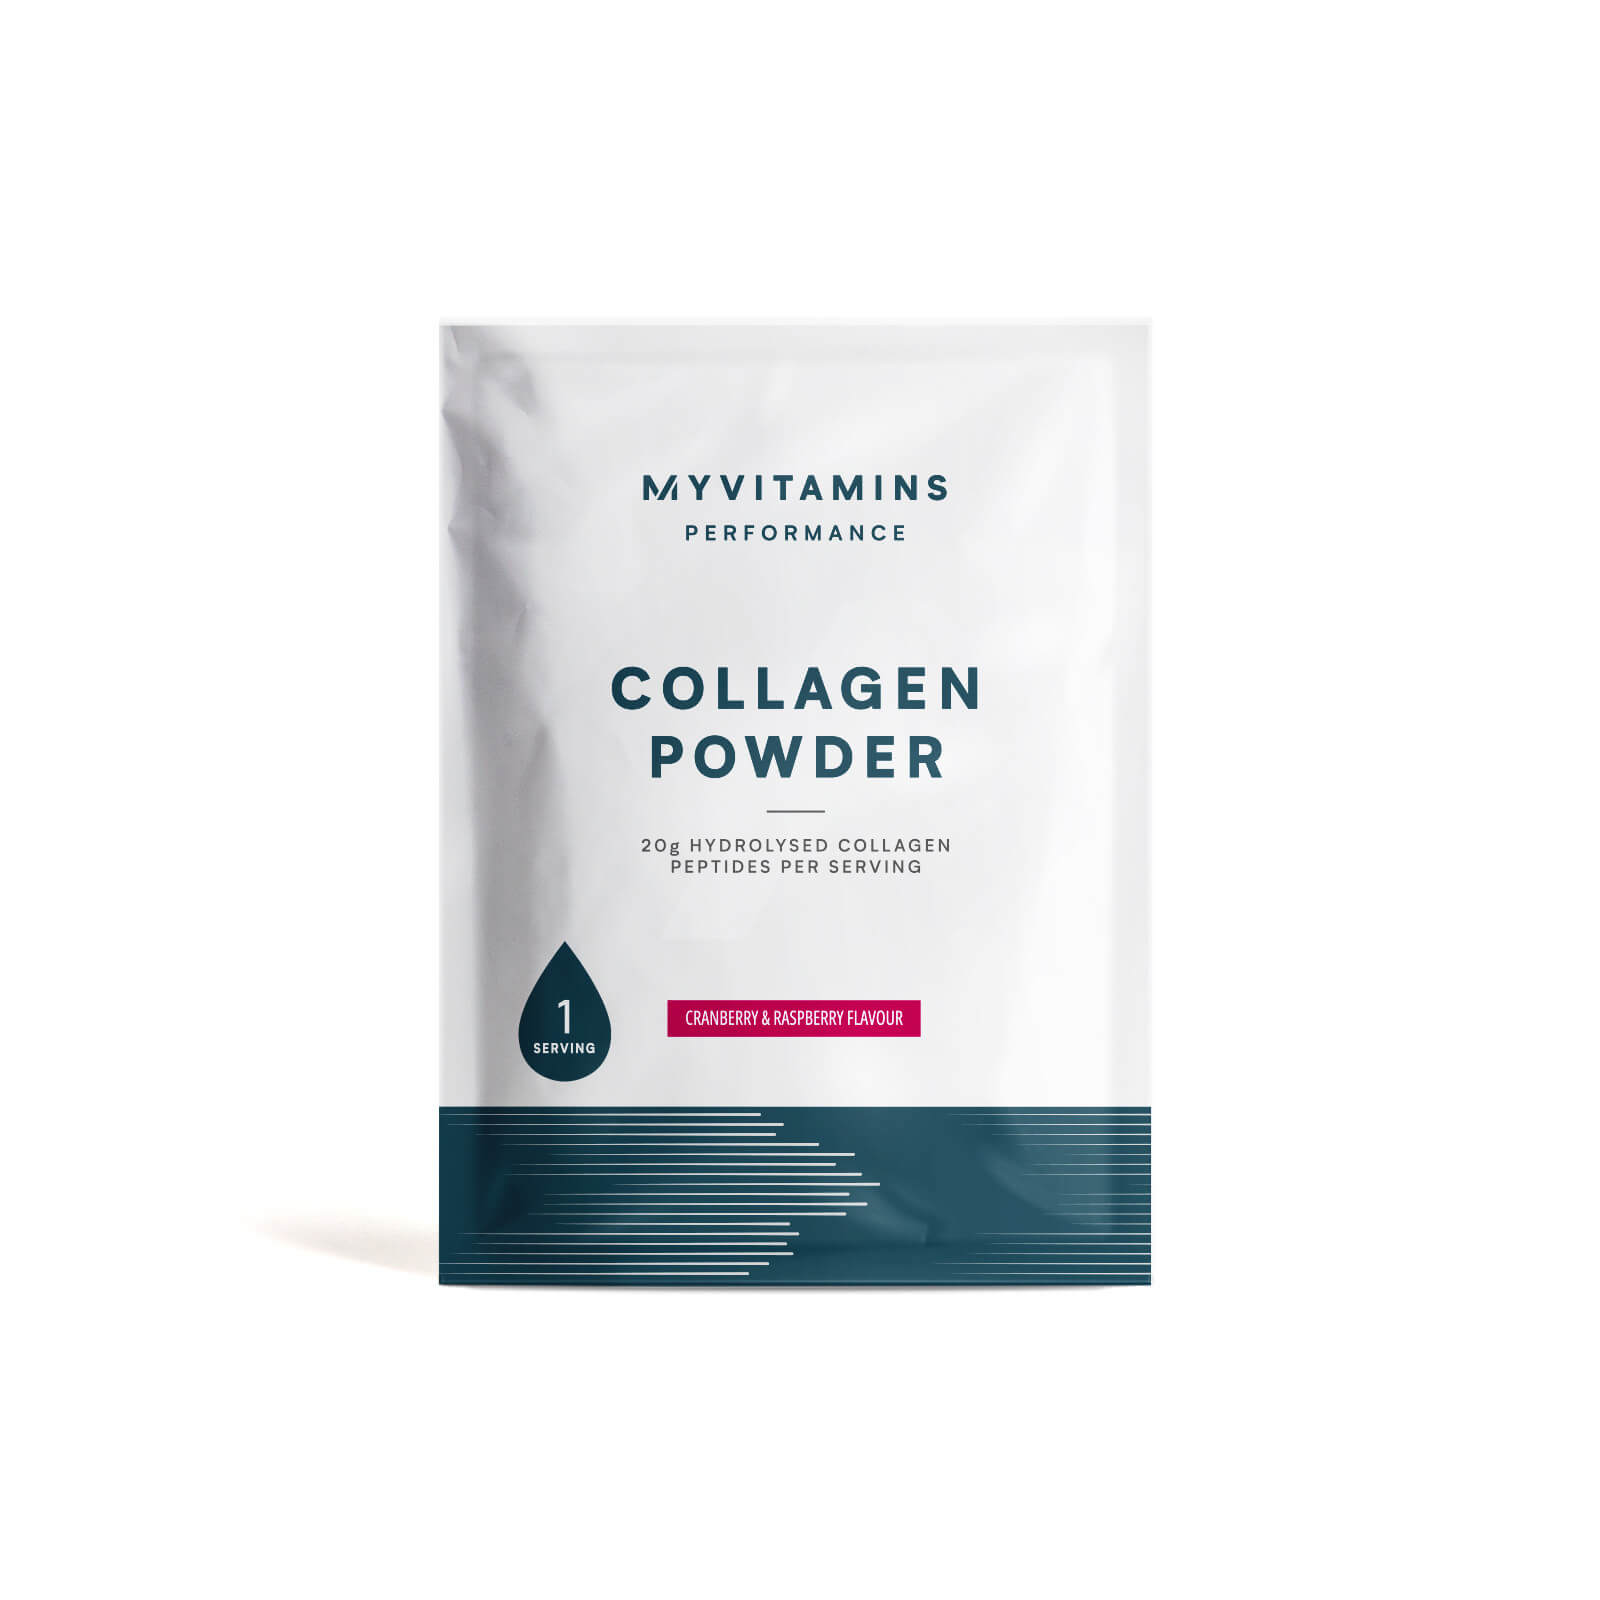 Image of Collagen Powder (Sample) - 1servings - Cranberry and Raspberry